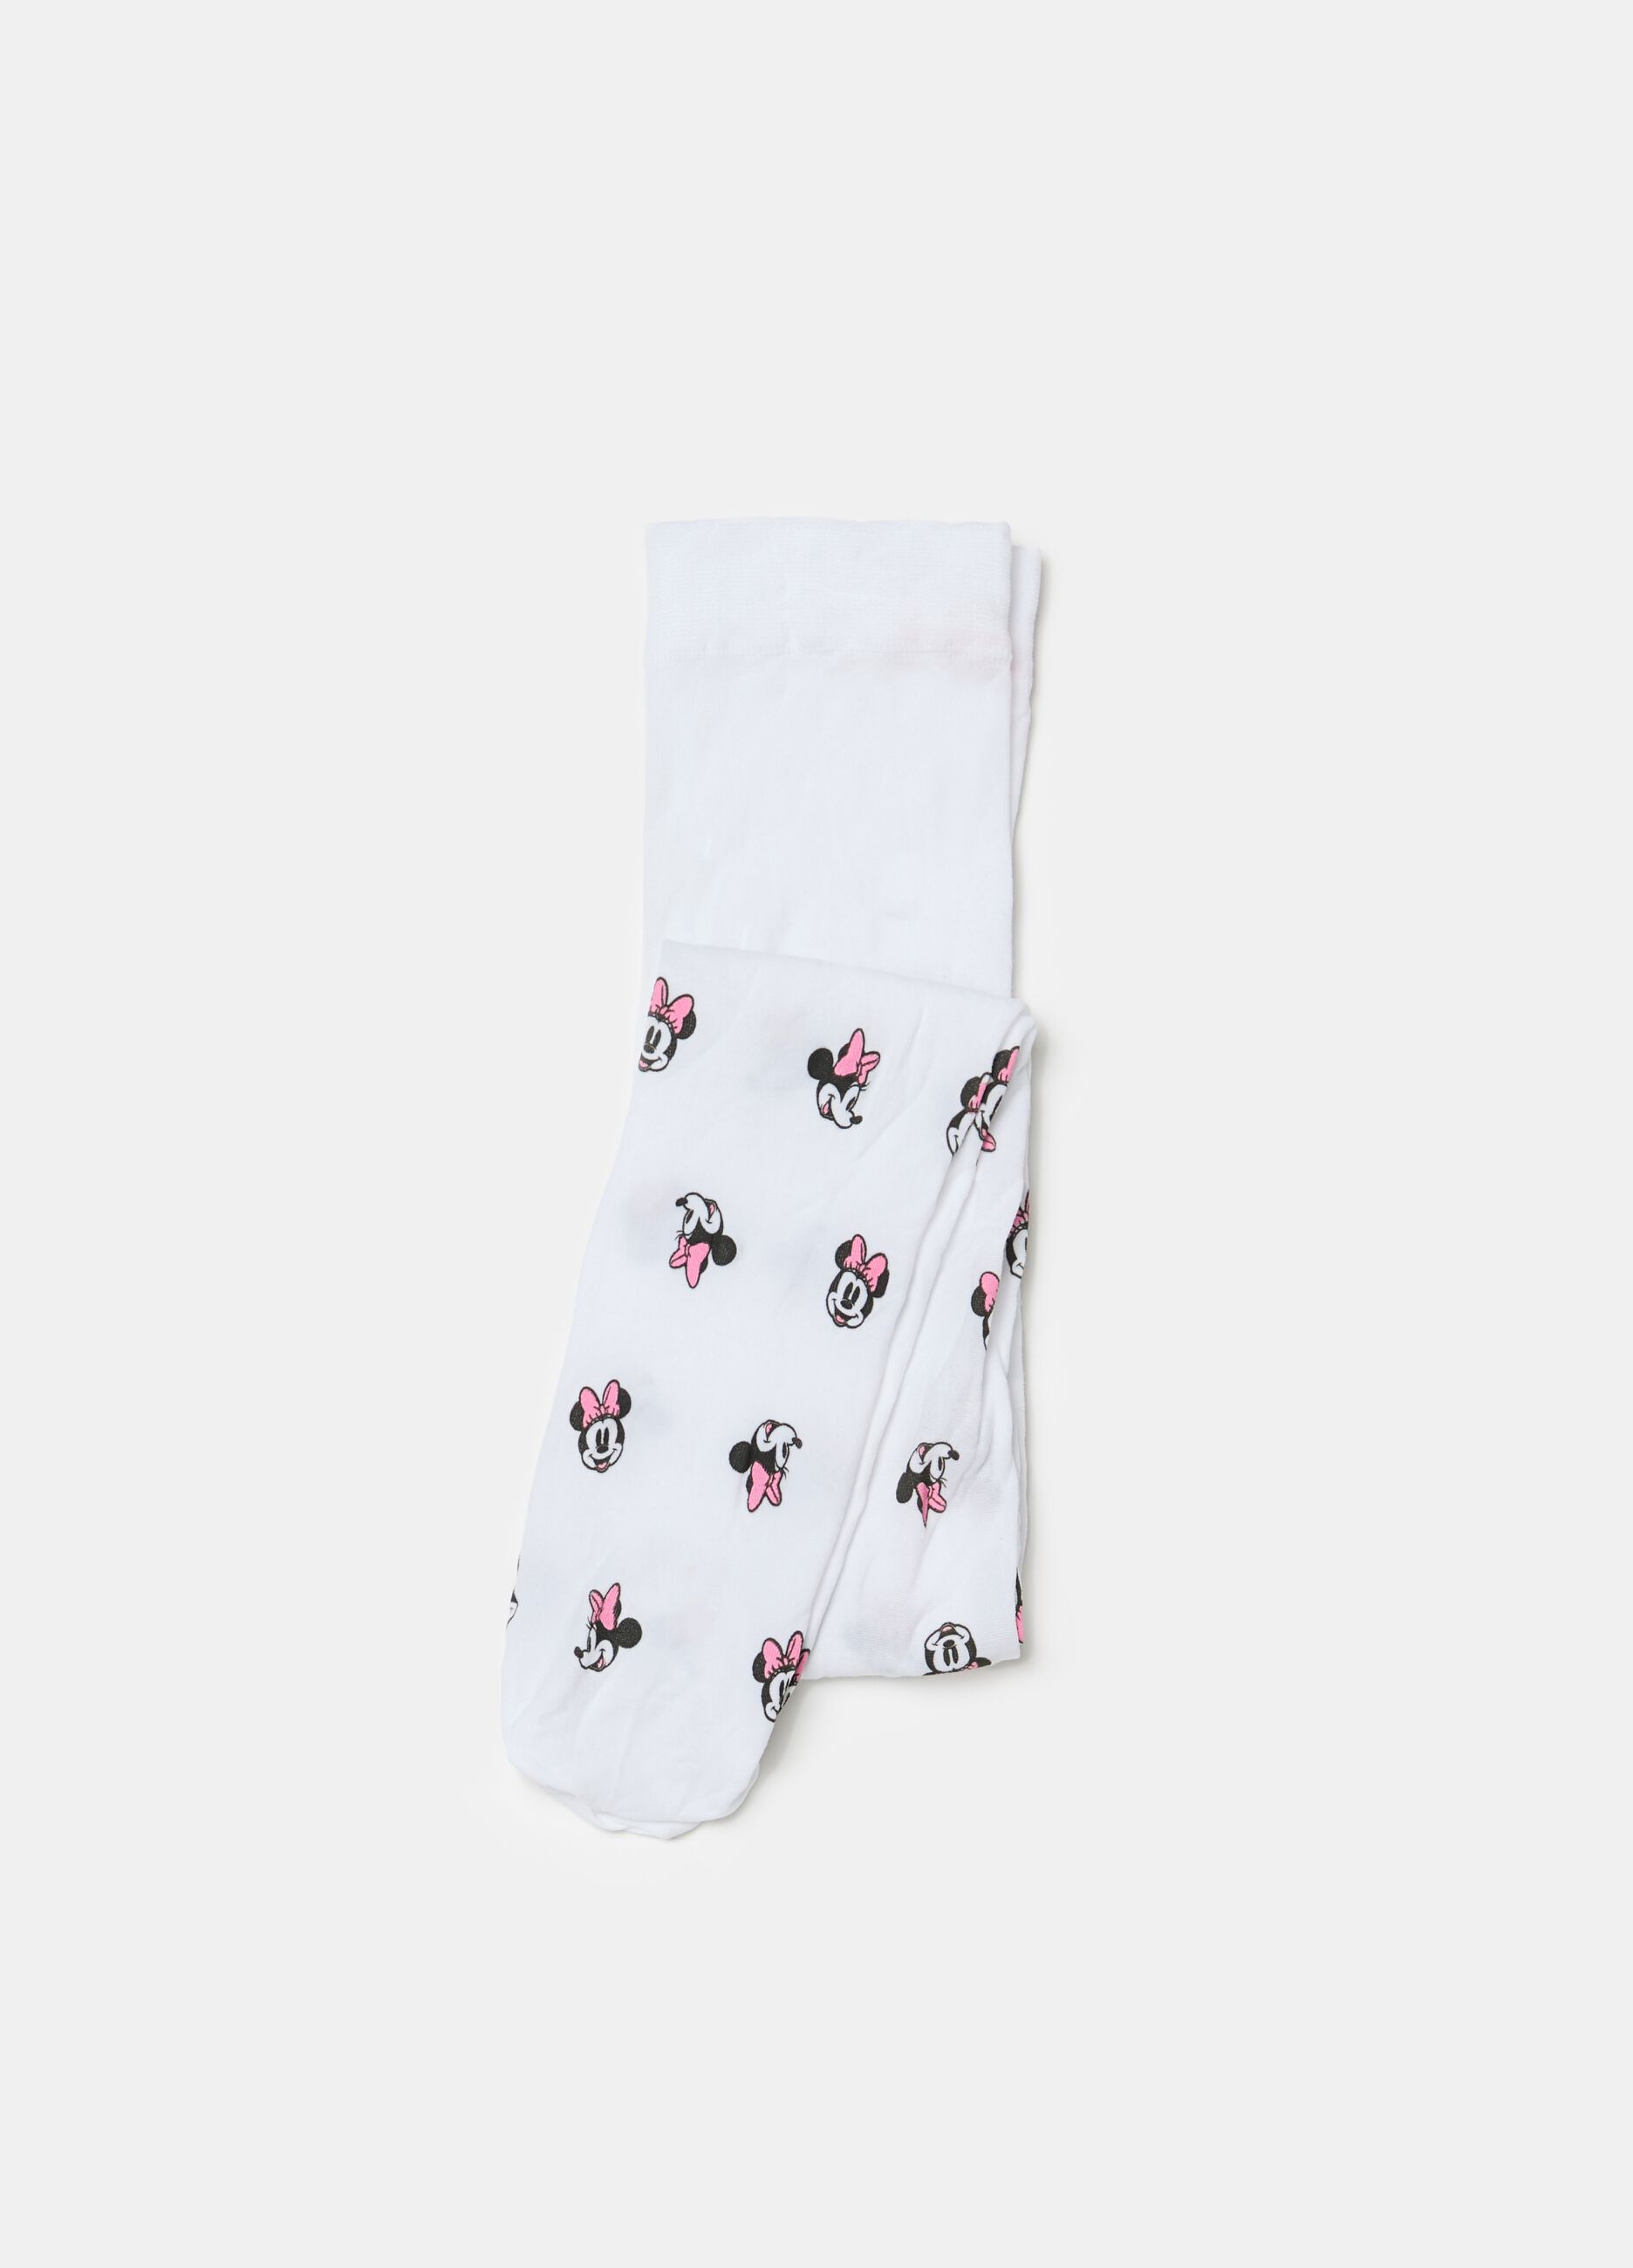 Tights with Minnie Mouse pattern